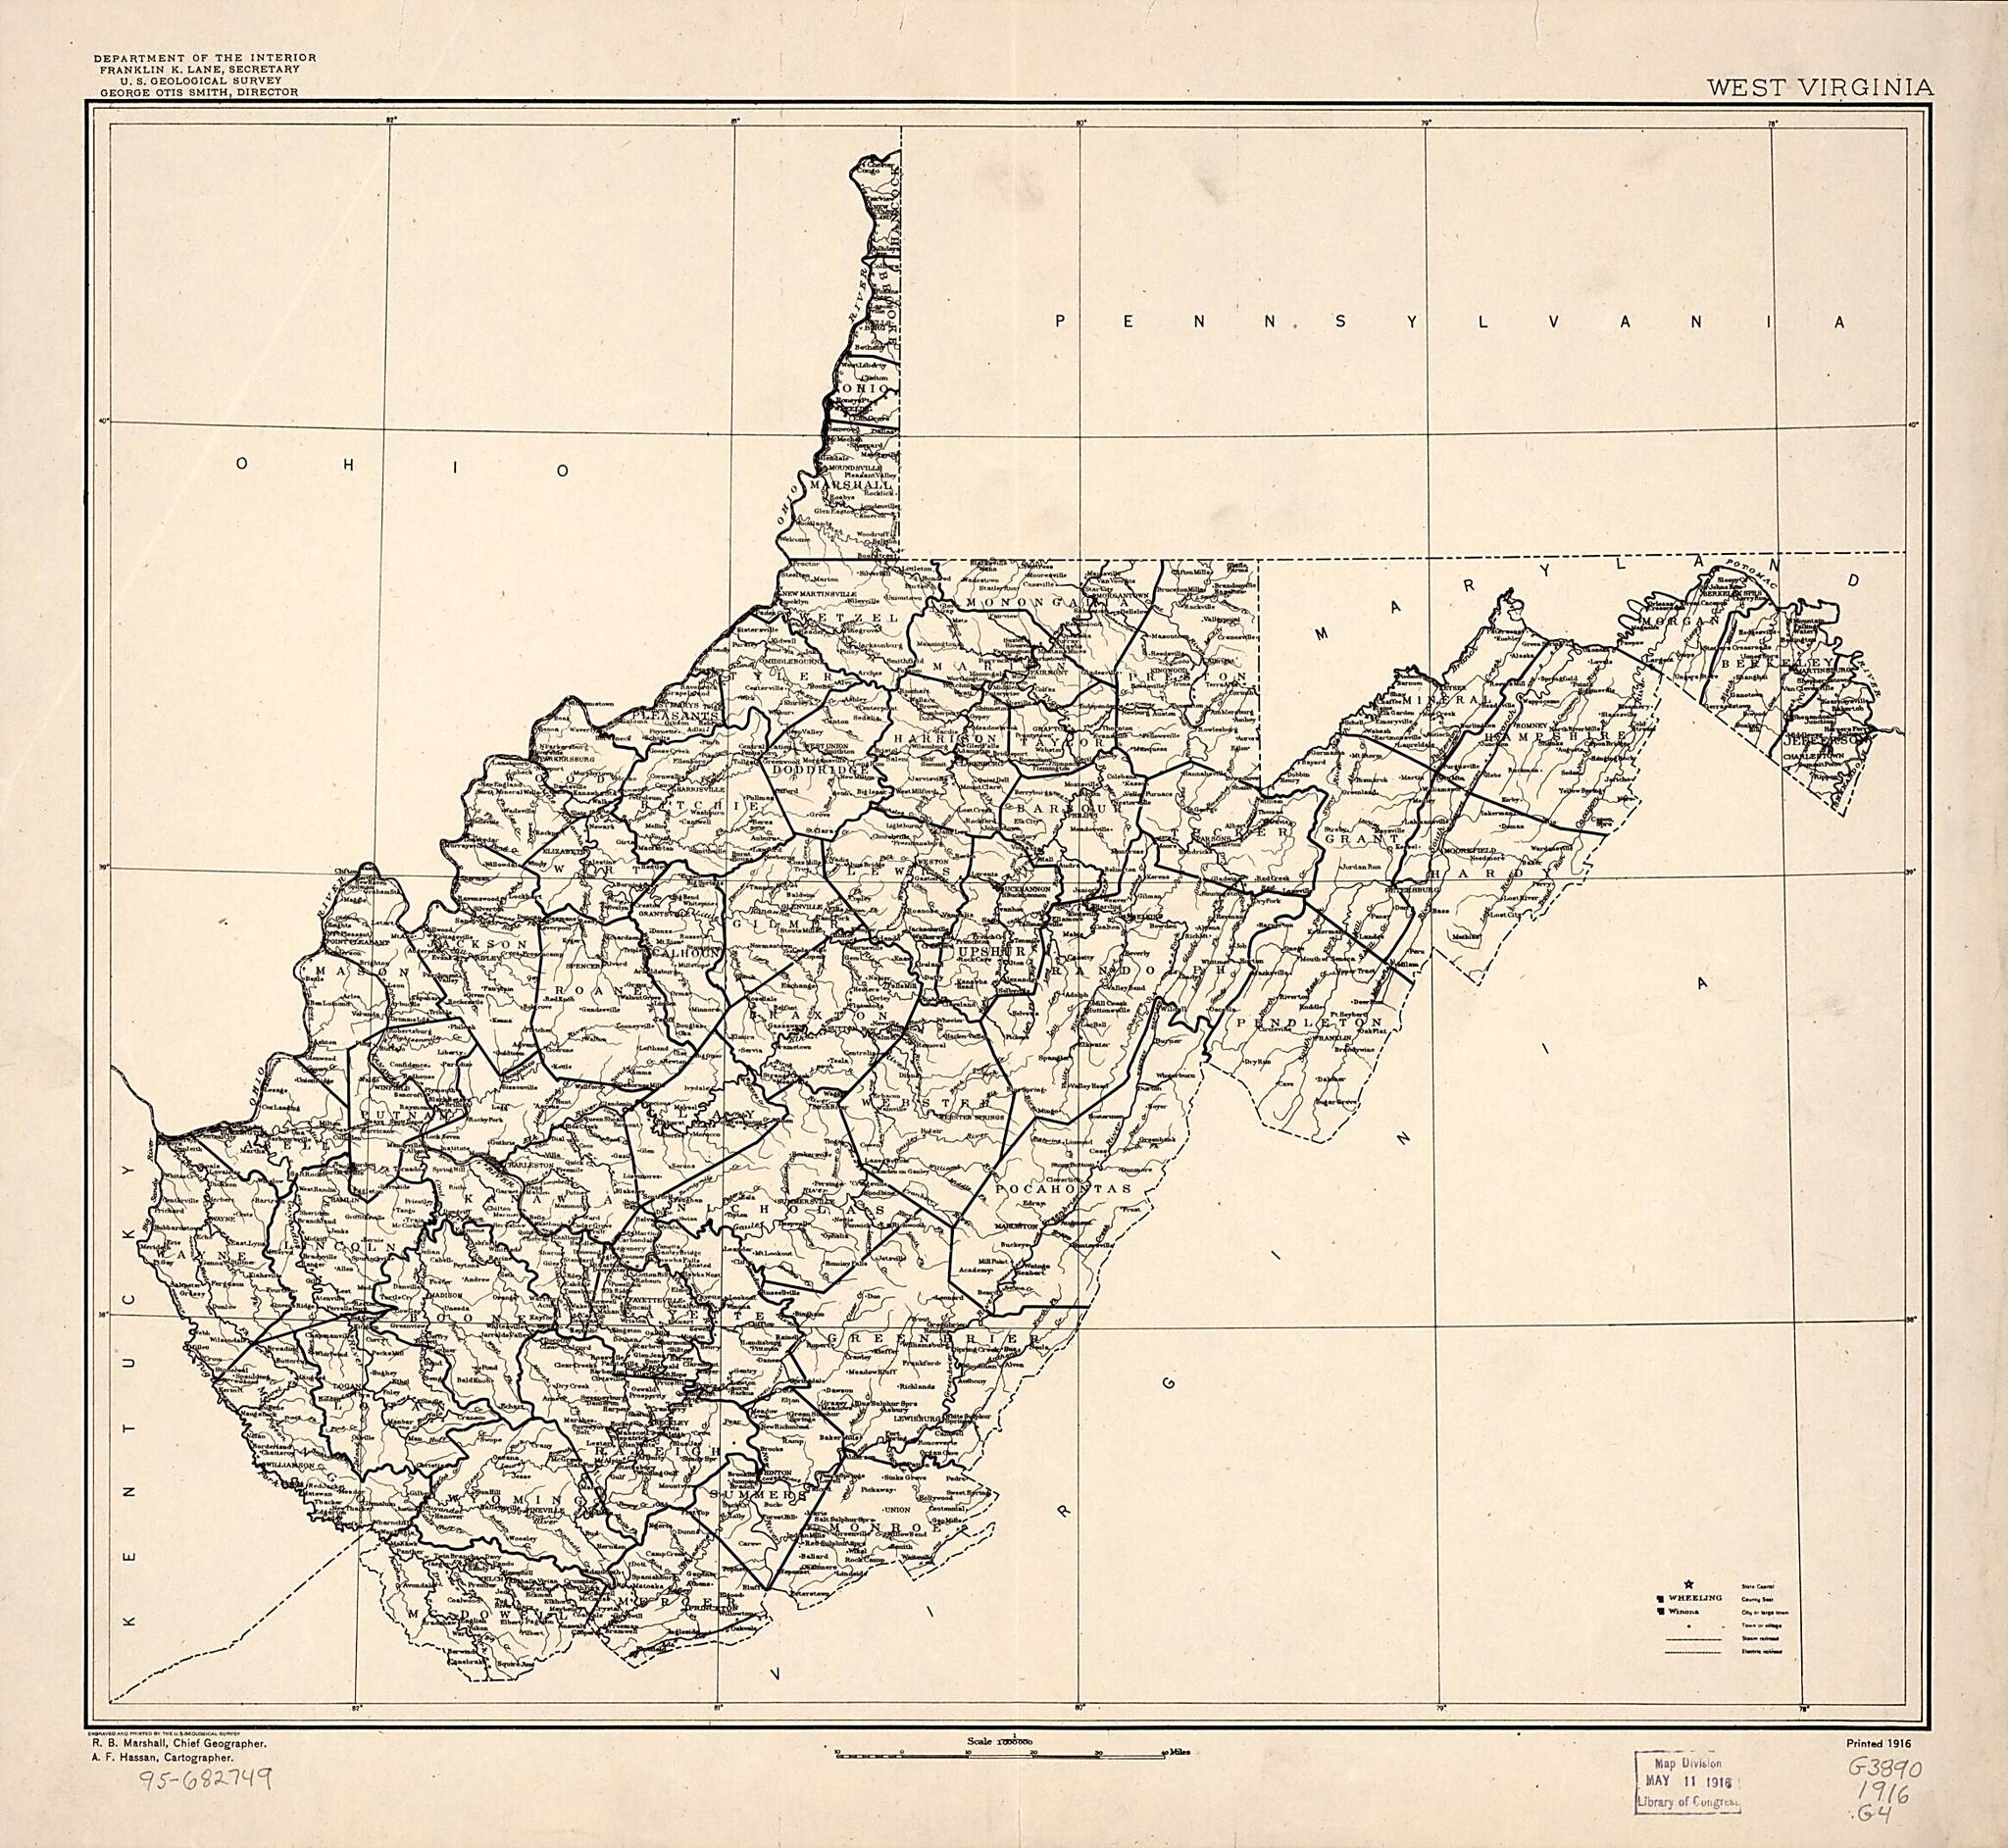 This old map of West Virginia from 1914 was created by  Geological Survey (U.S.) in 1914